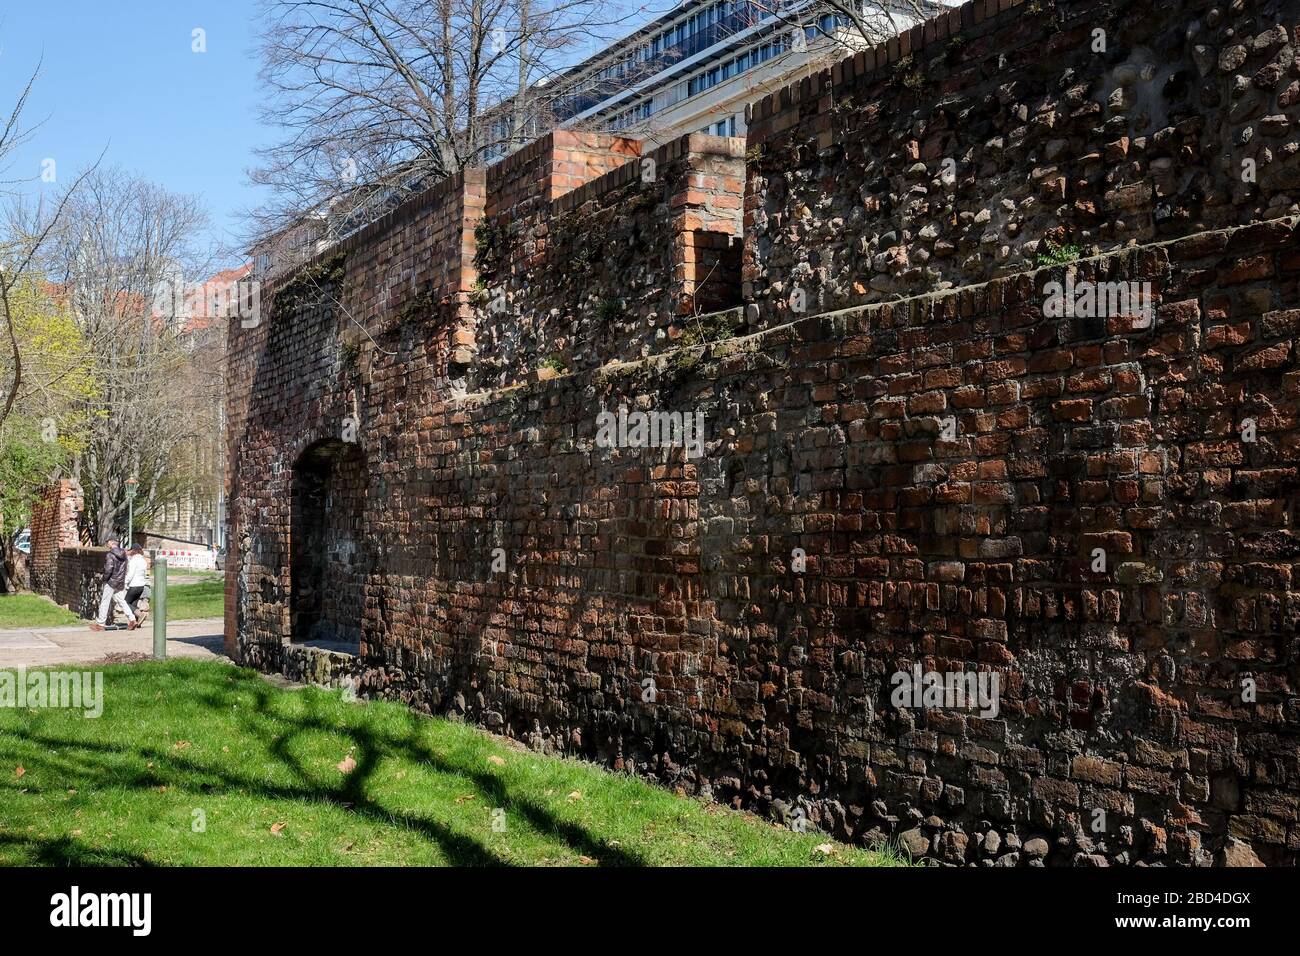 Colln Berlin High Resolution Stock Photography and Images - Alamy